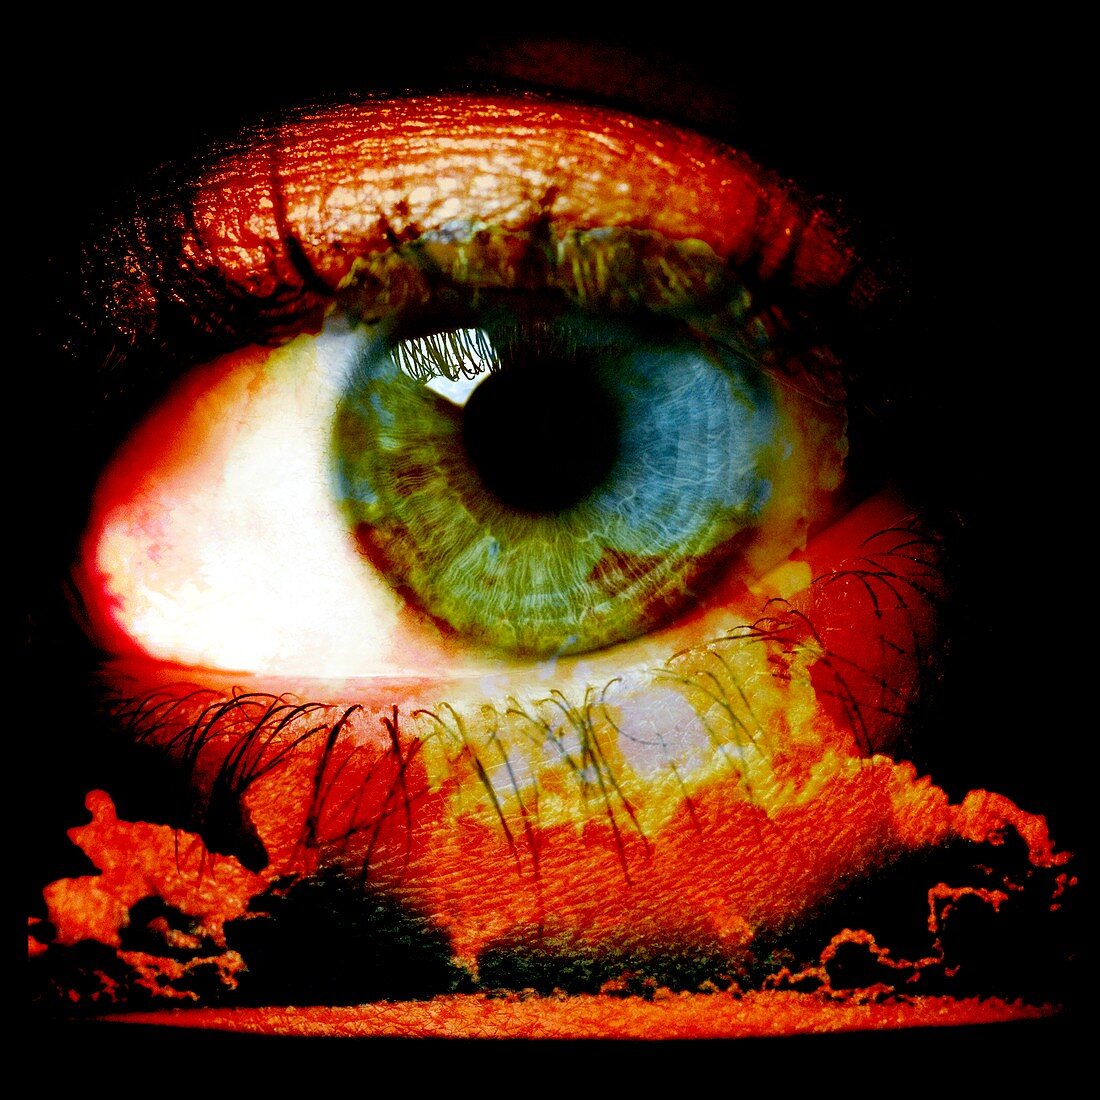 Human eye and nuclear explosion